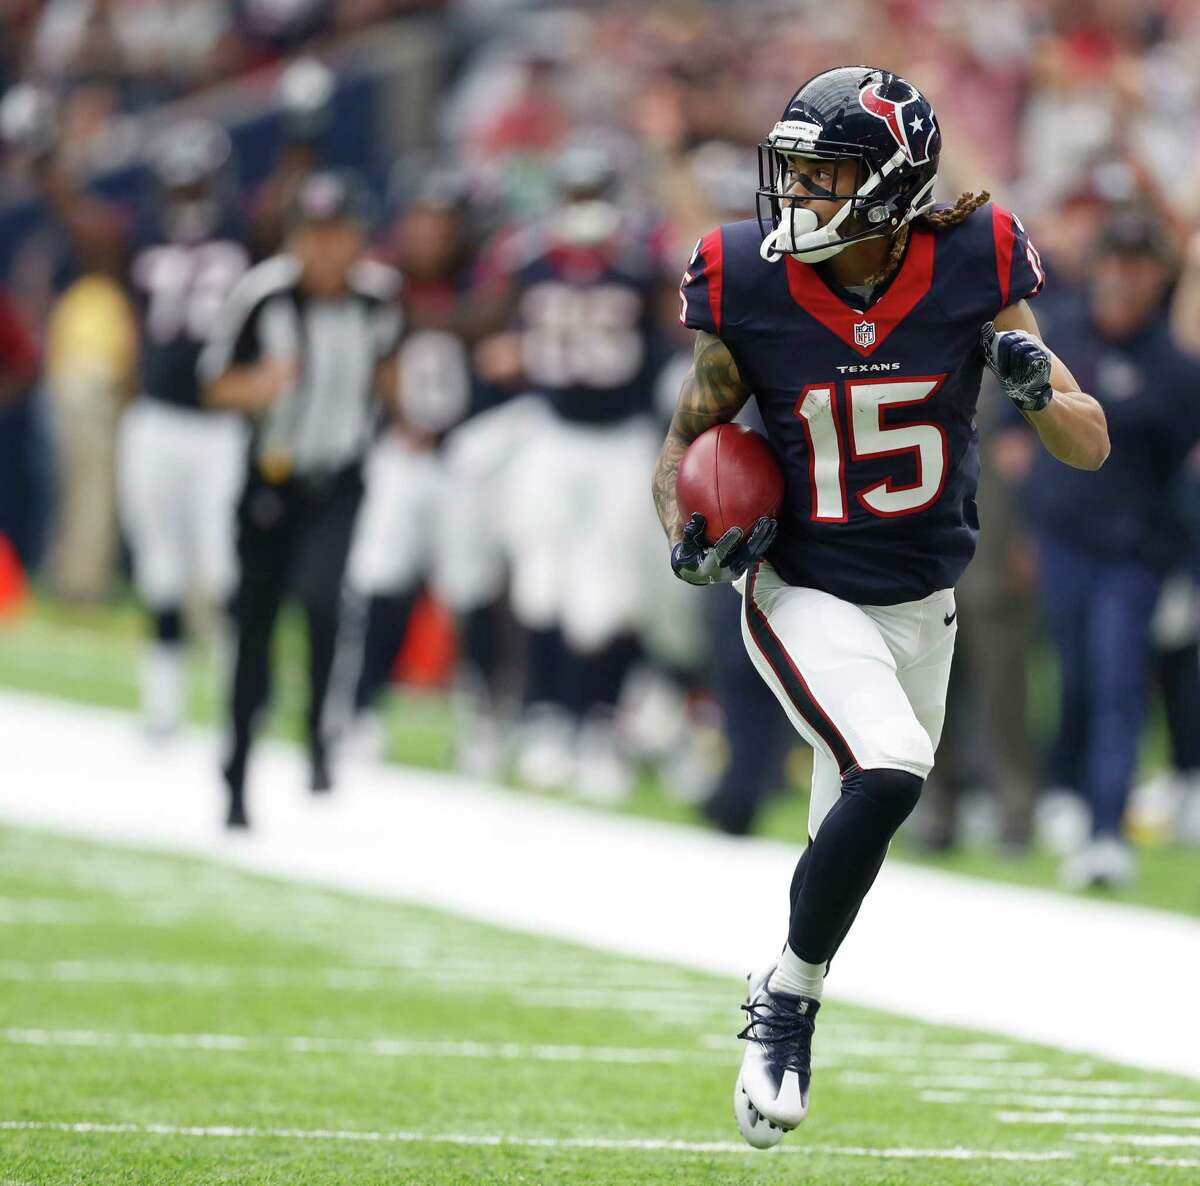 Will Fuller had a 67-yard punt return for a TD against the Titans in their first matchup.